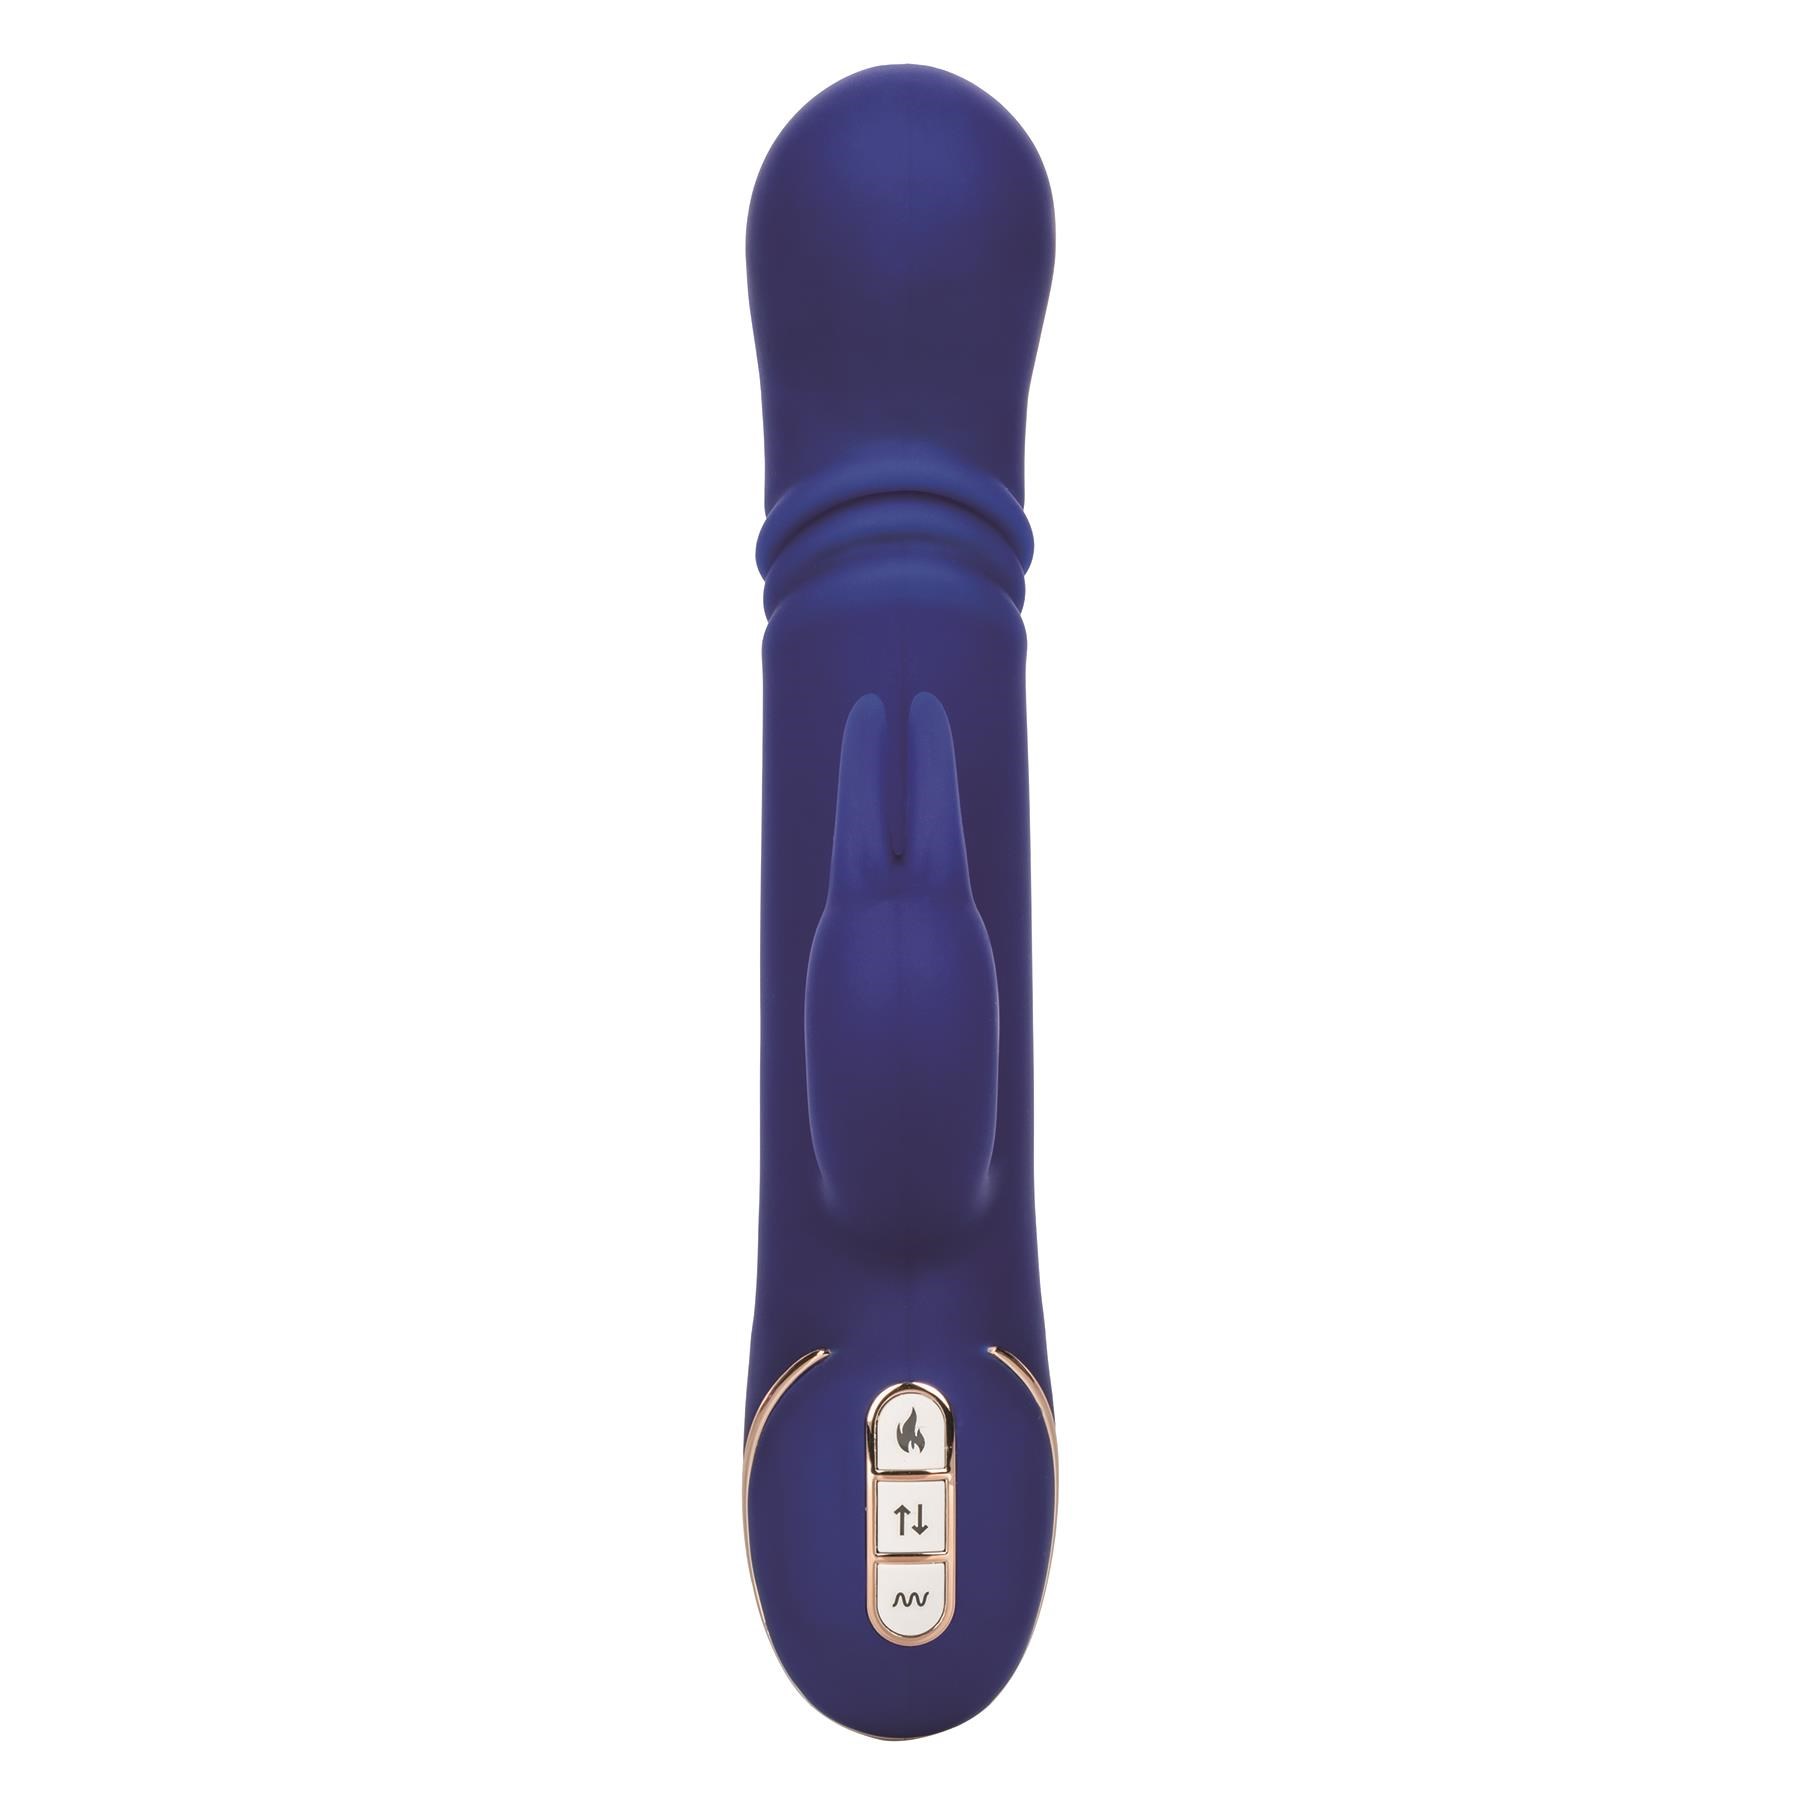 Jack Rabbit Signature Rechargeable Heated Thrusting Rabbit Front